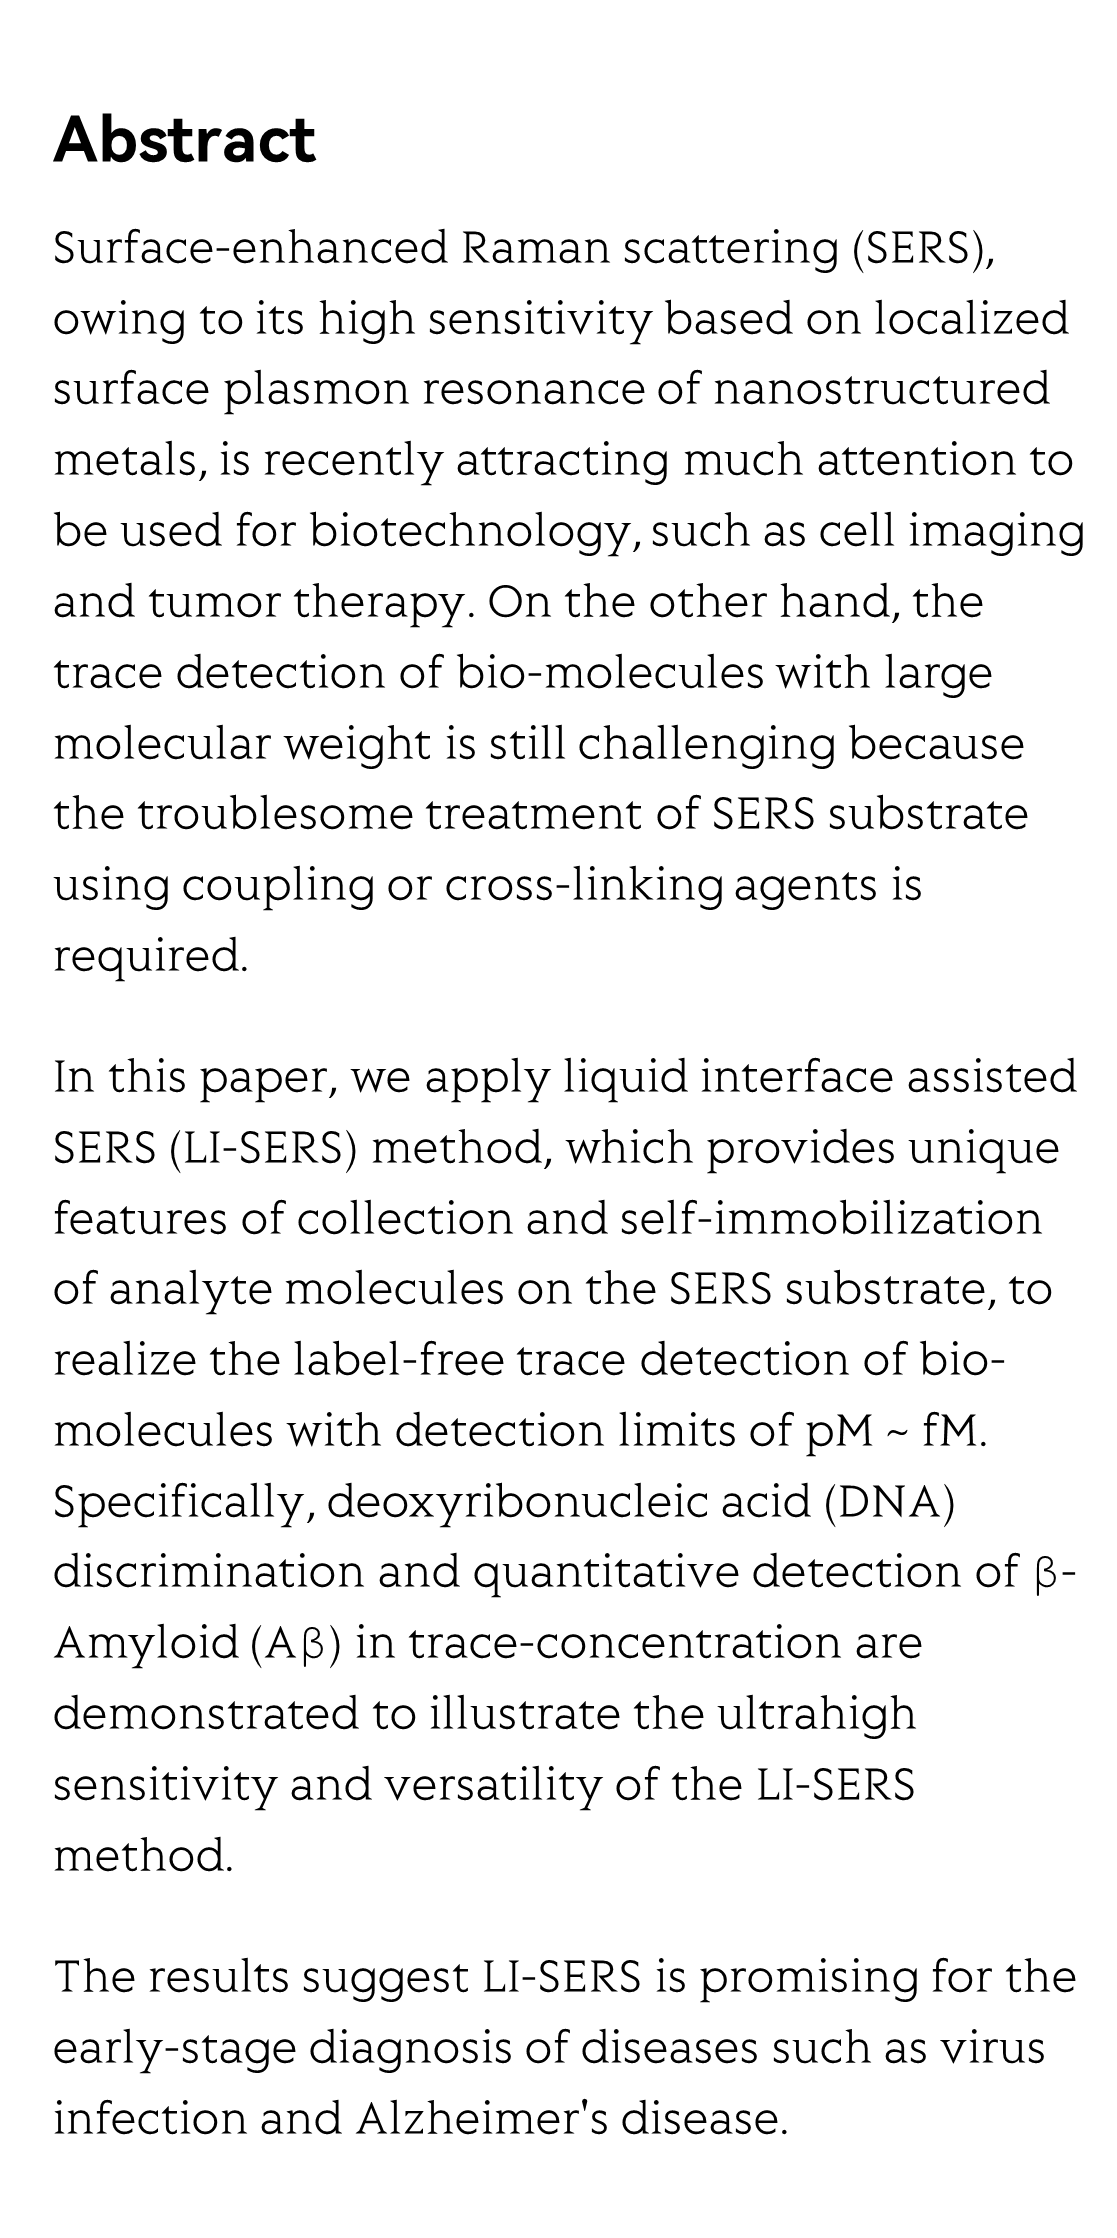 Label-free trace detection of bio-molecules by liquid-interface assisted surface-enhanced Raman scattering using a microfluidic chip_2